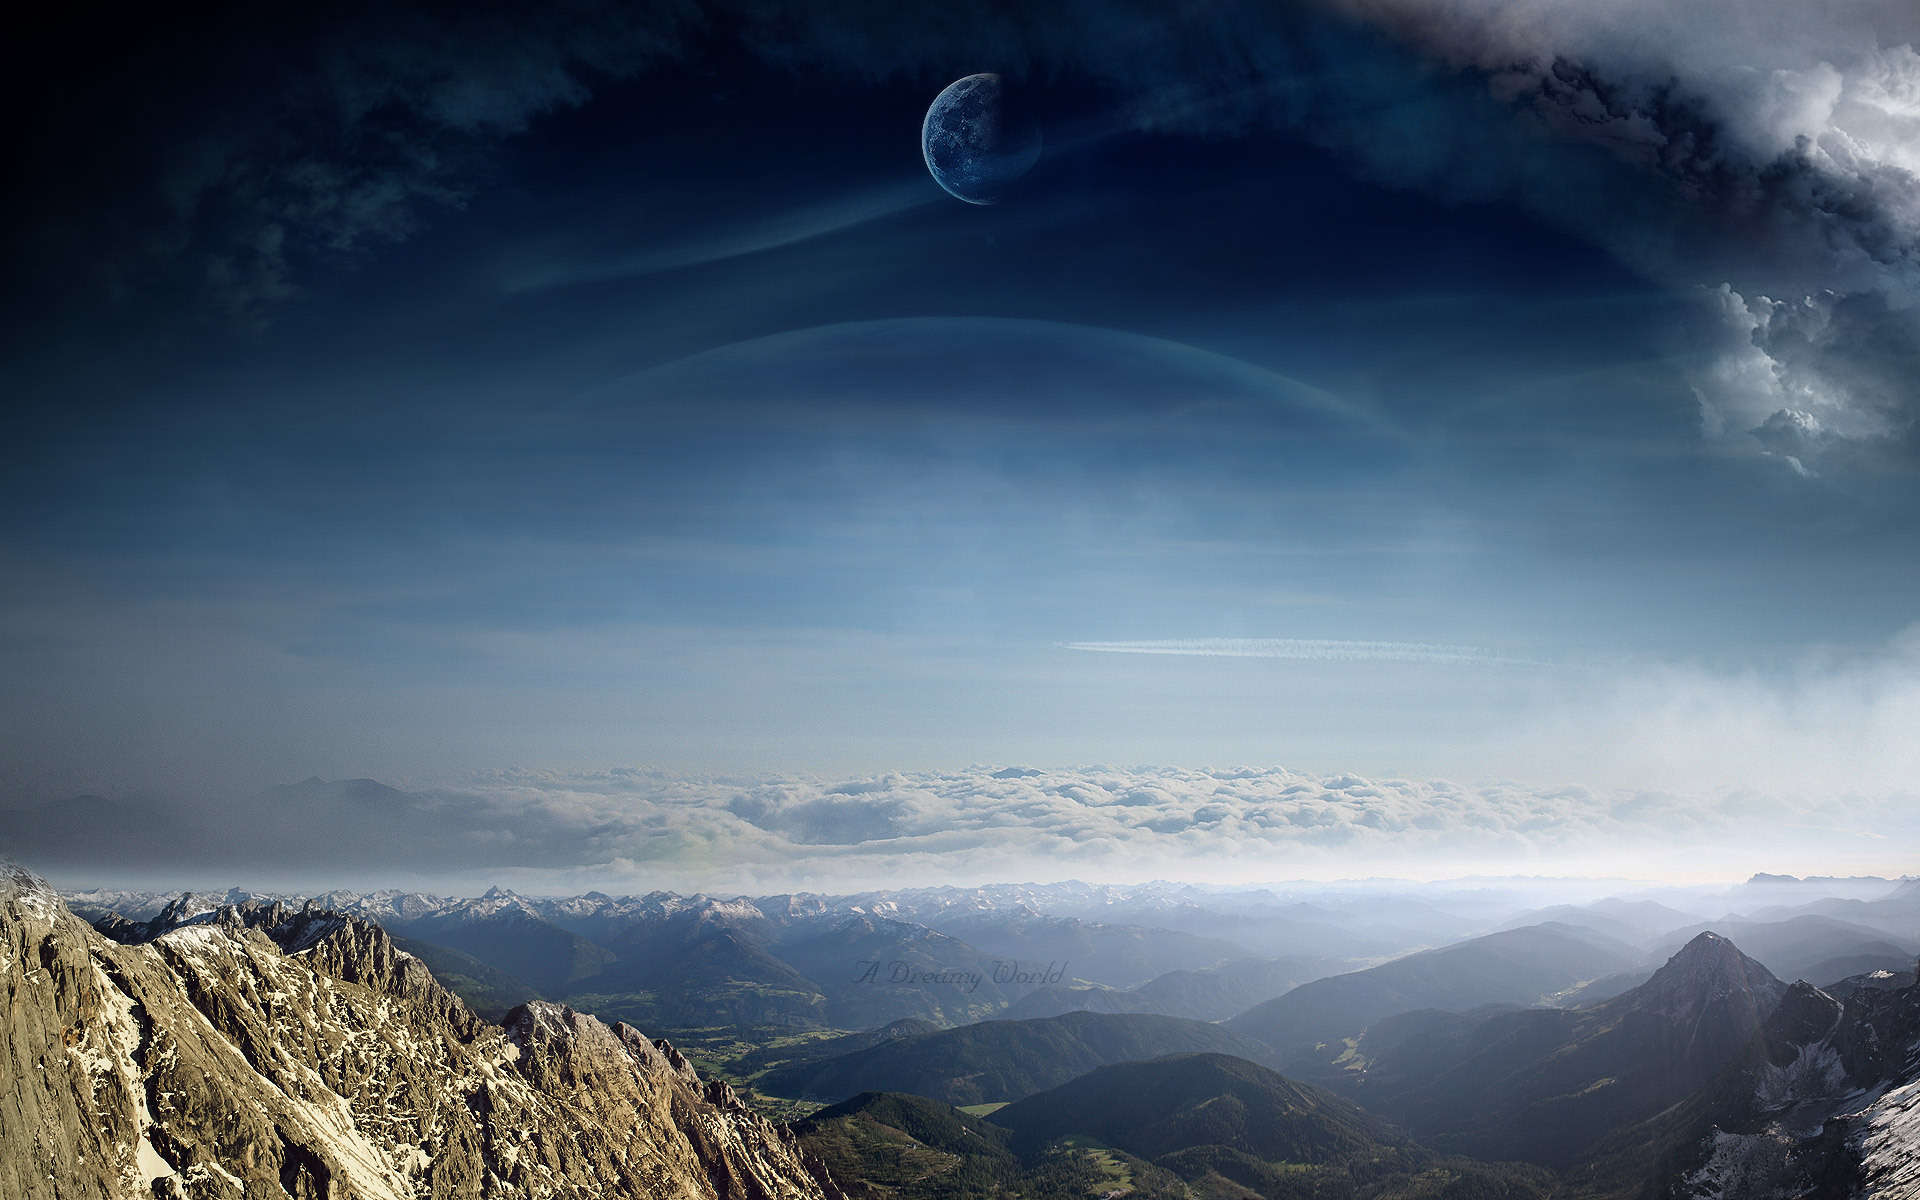 manipulations, Sci fi, Cg, Digital art, Landscapes, Mountains, Skies, Clouds, Dreamy, Planets, Moons, Scenic, Alien landscapes Wallpaper